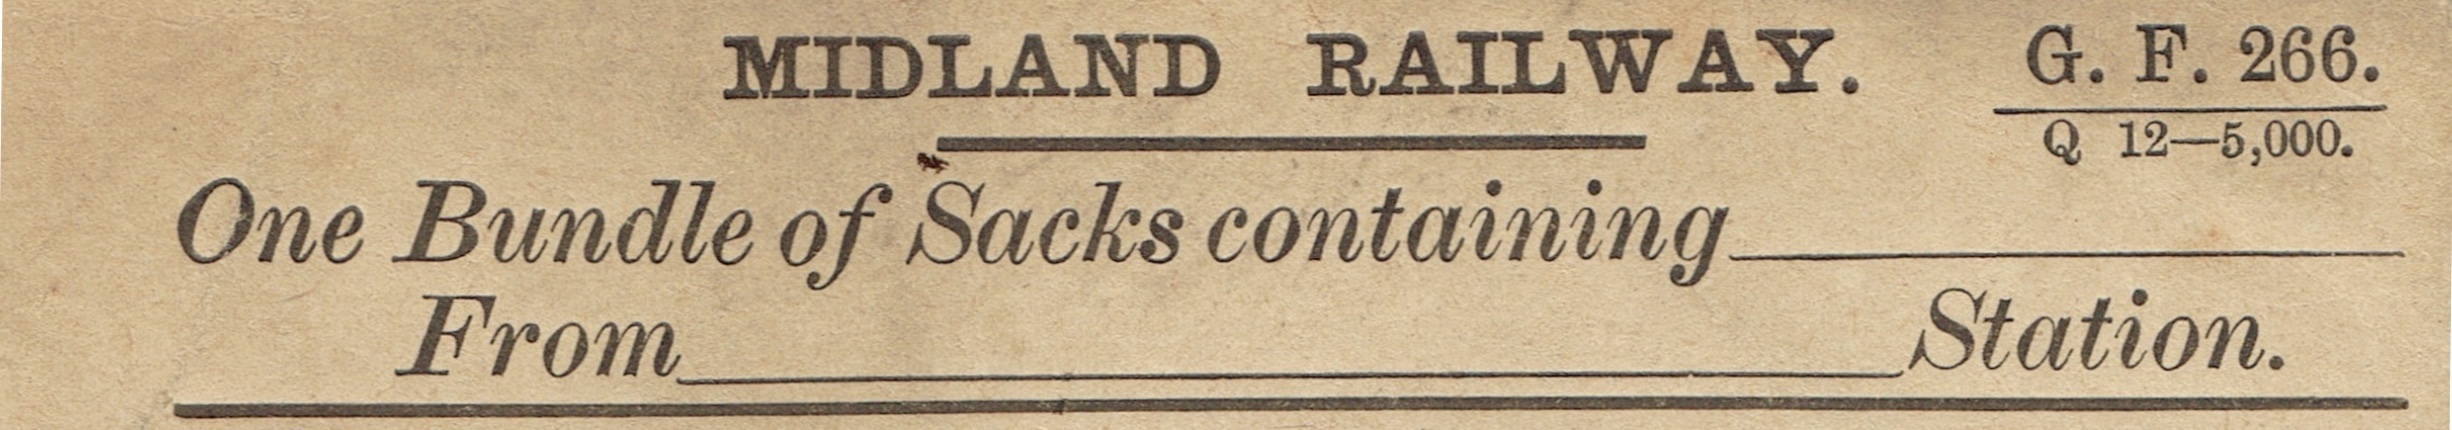 A break-section banner which reads MIDLAND RAILWAY. G. F. 266. - One Bundle of Sacks containing...